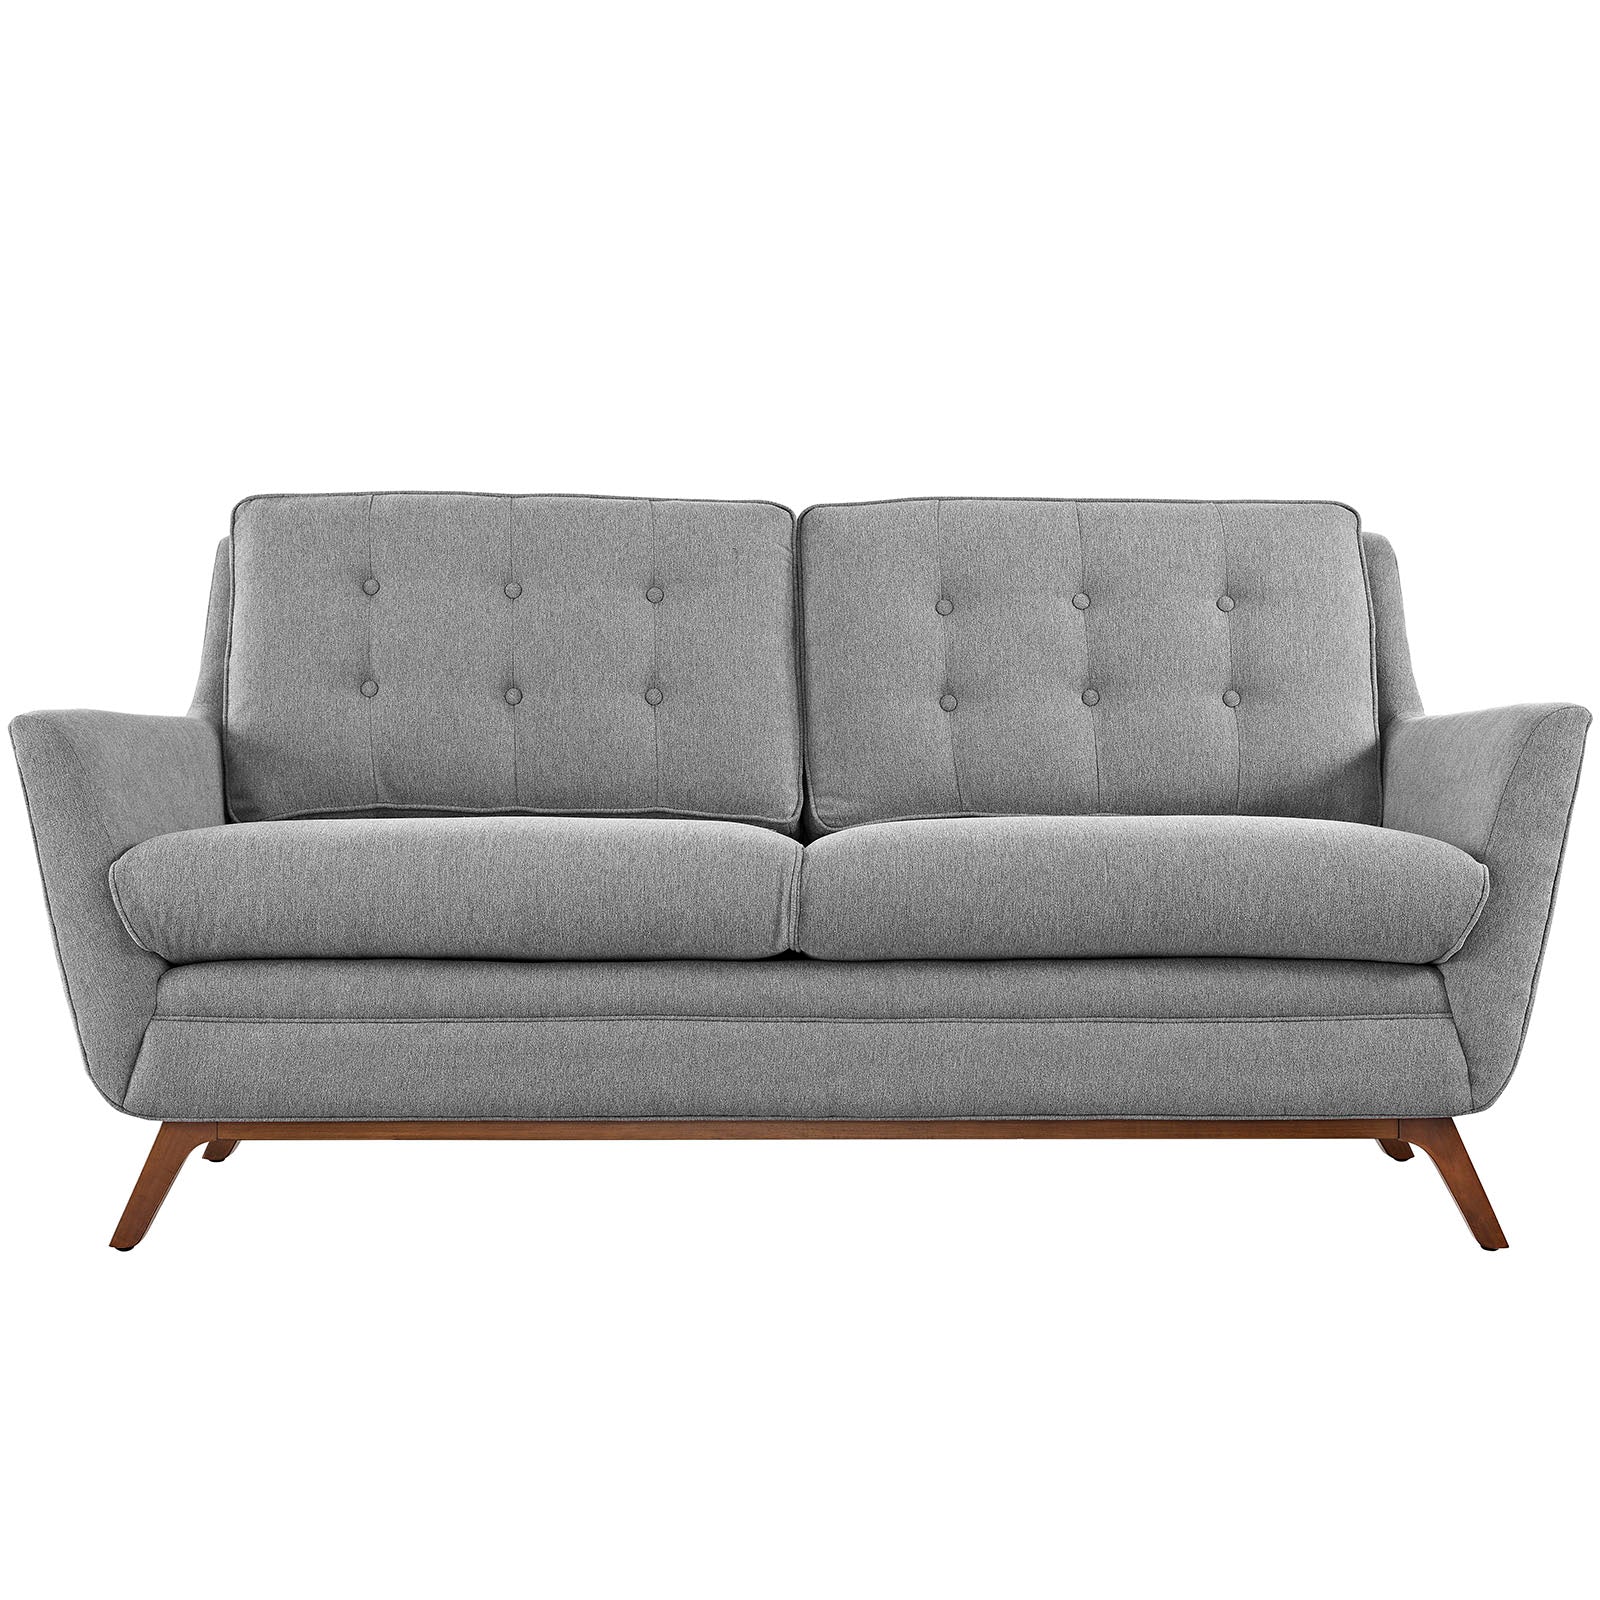 Modway Loveseats - Beguile Upholstered Fabric Loveseat Expectation Gray